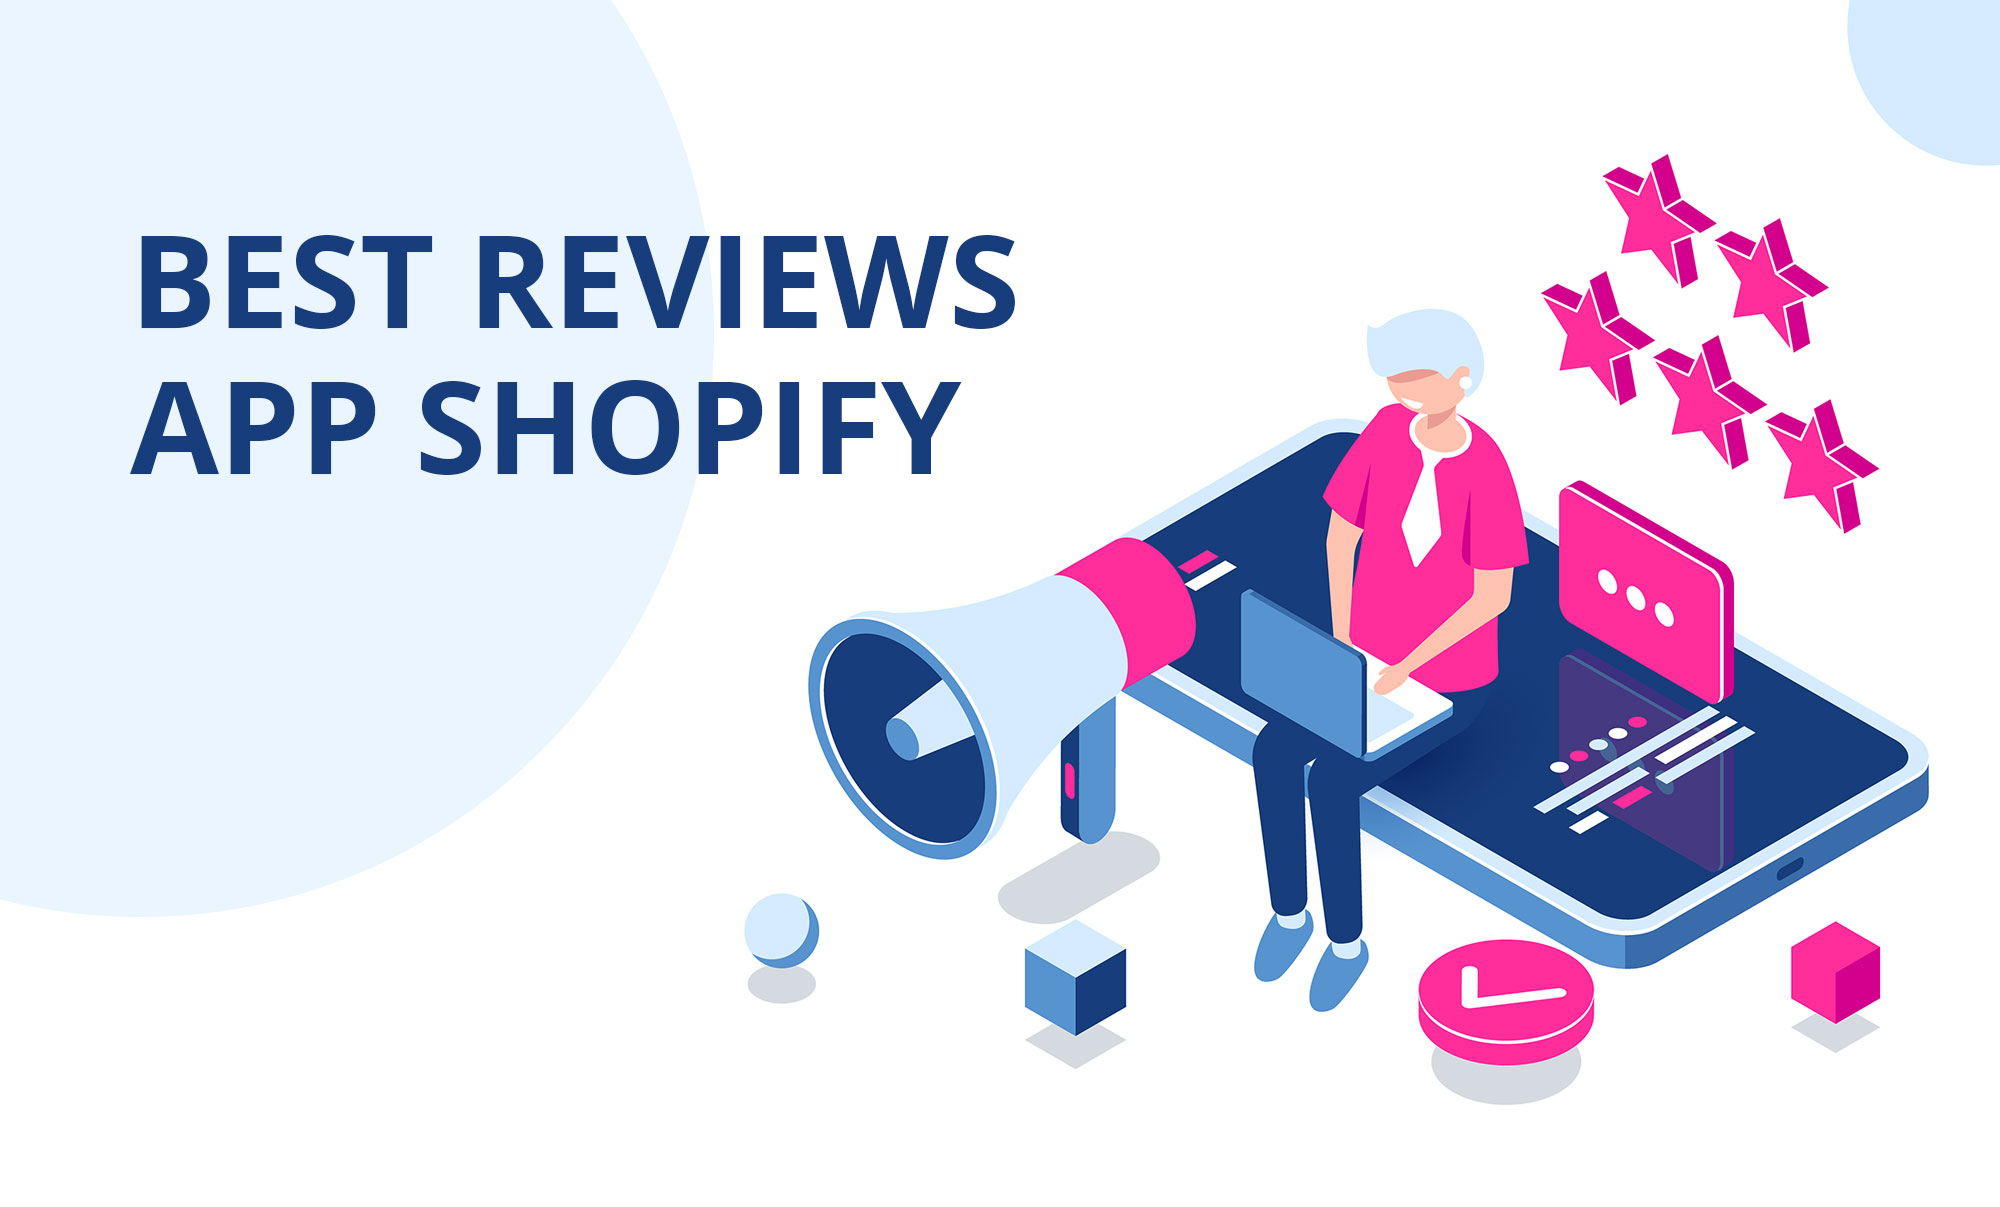 What is the importance of a Product Reviews app for shopify store